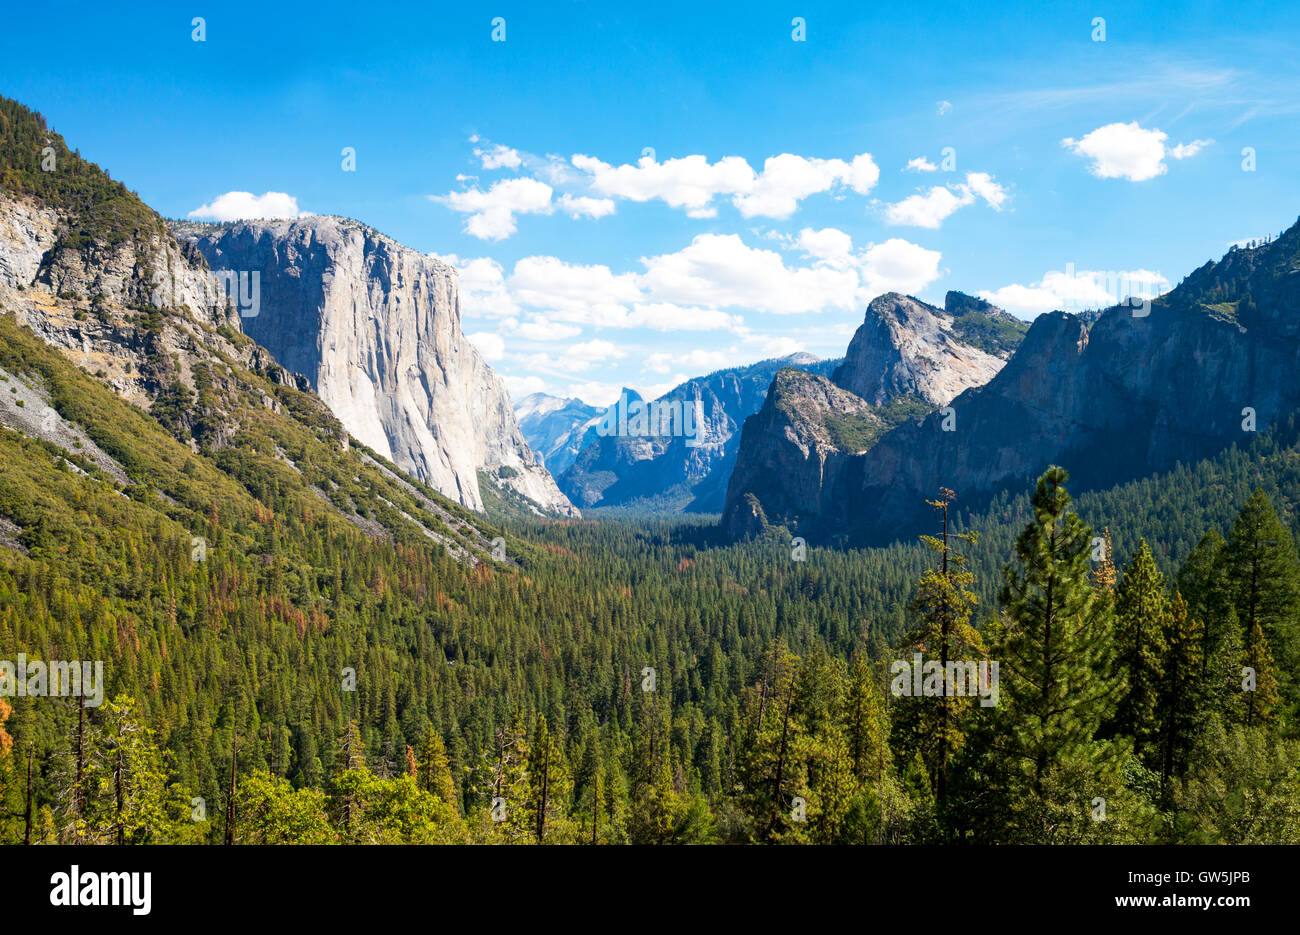 Yosemite National Park, California, panoramic view of the valley with the El Capitan and the Cathedral Spires mountains Stock Photo